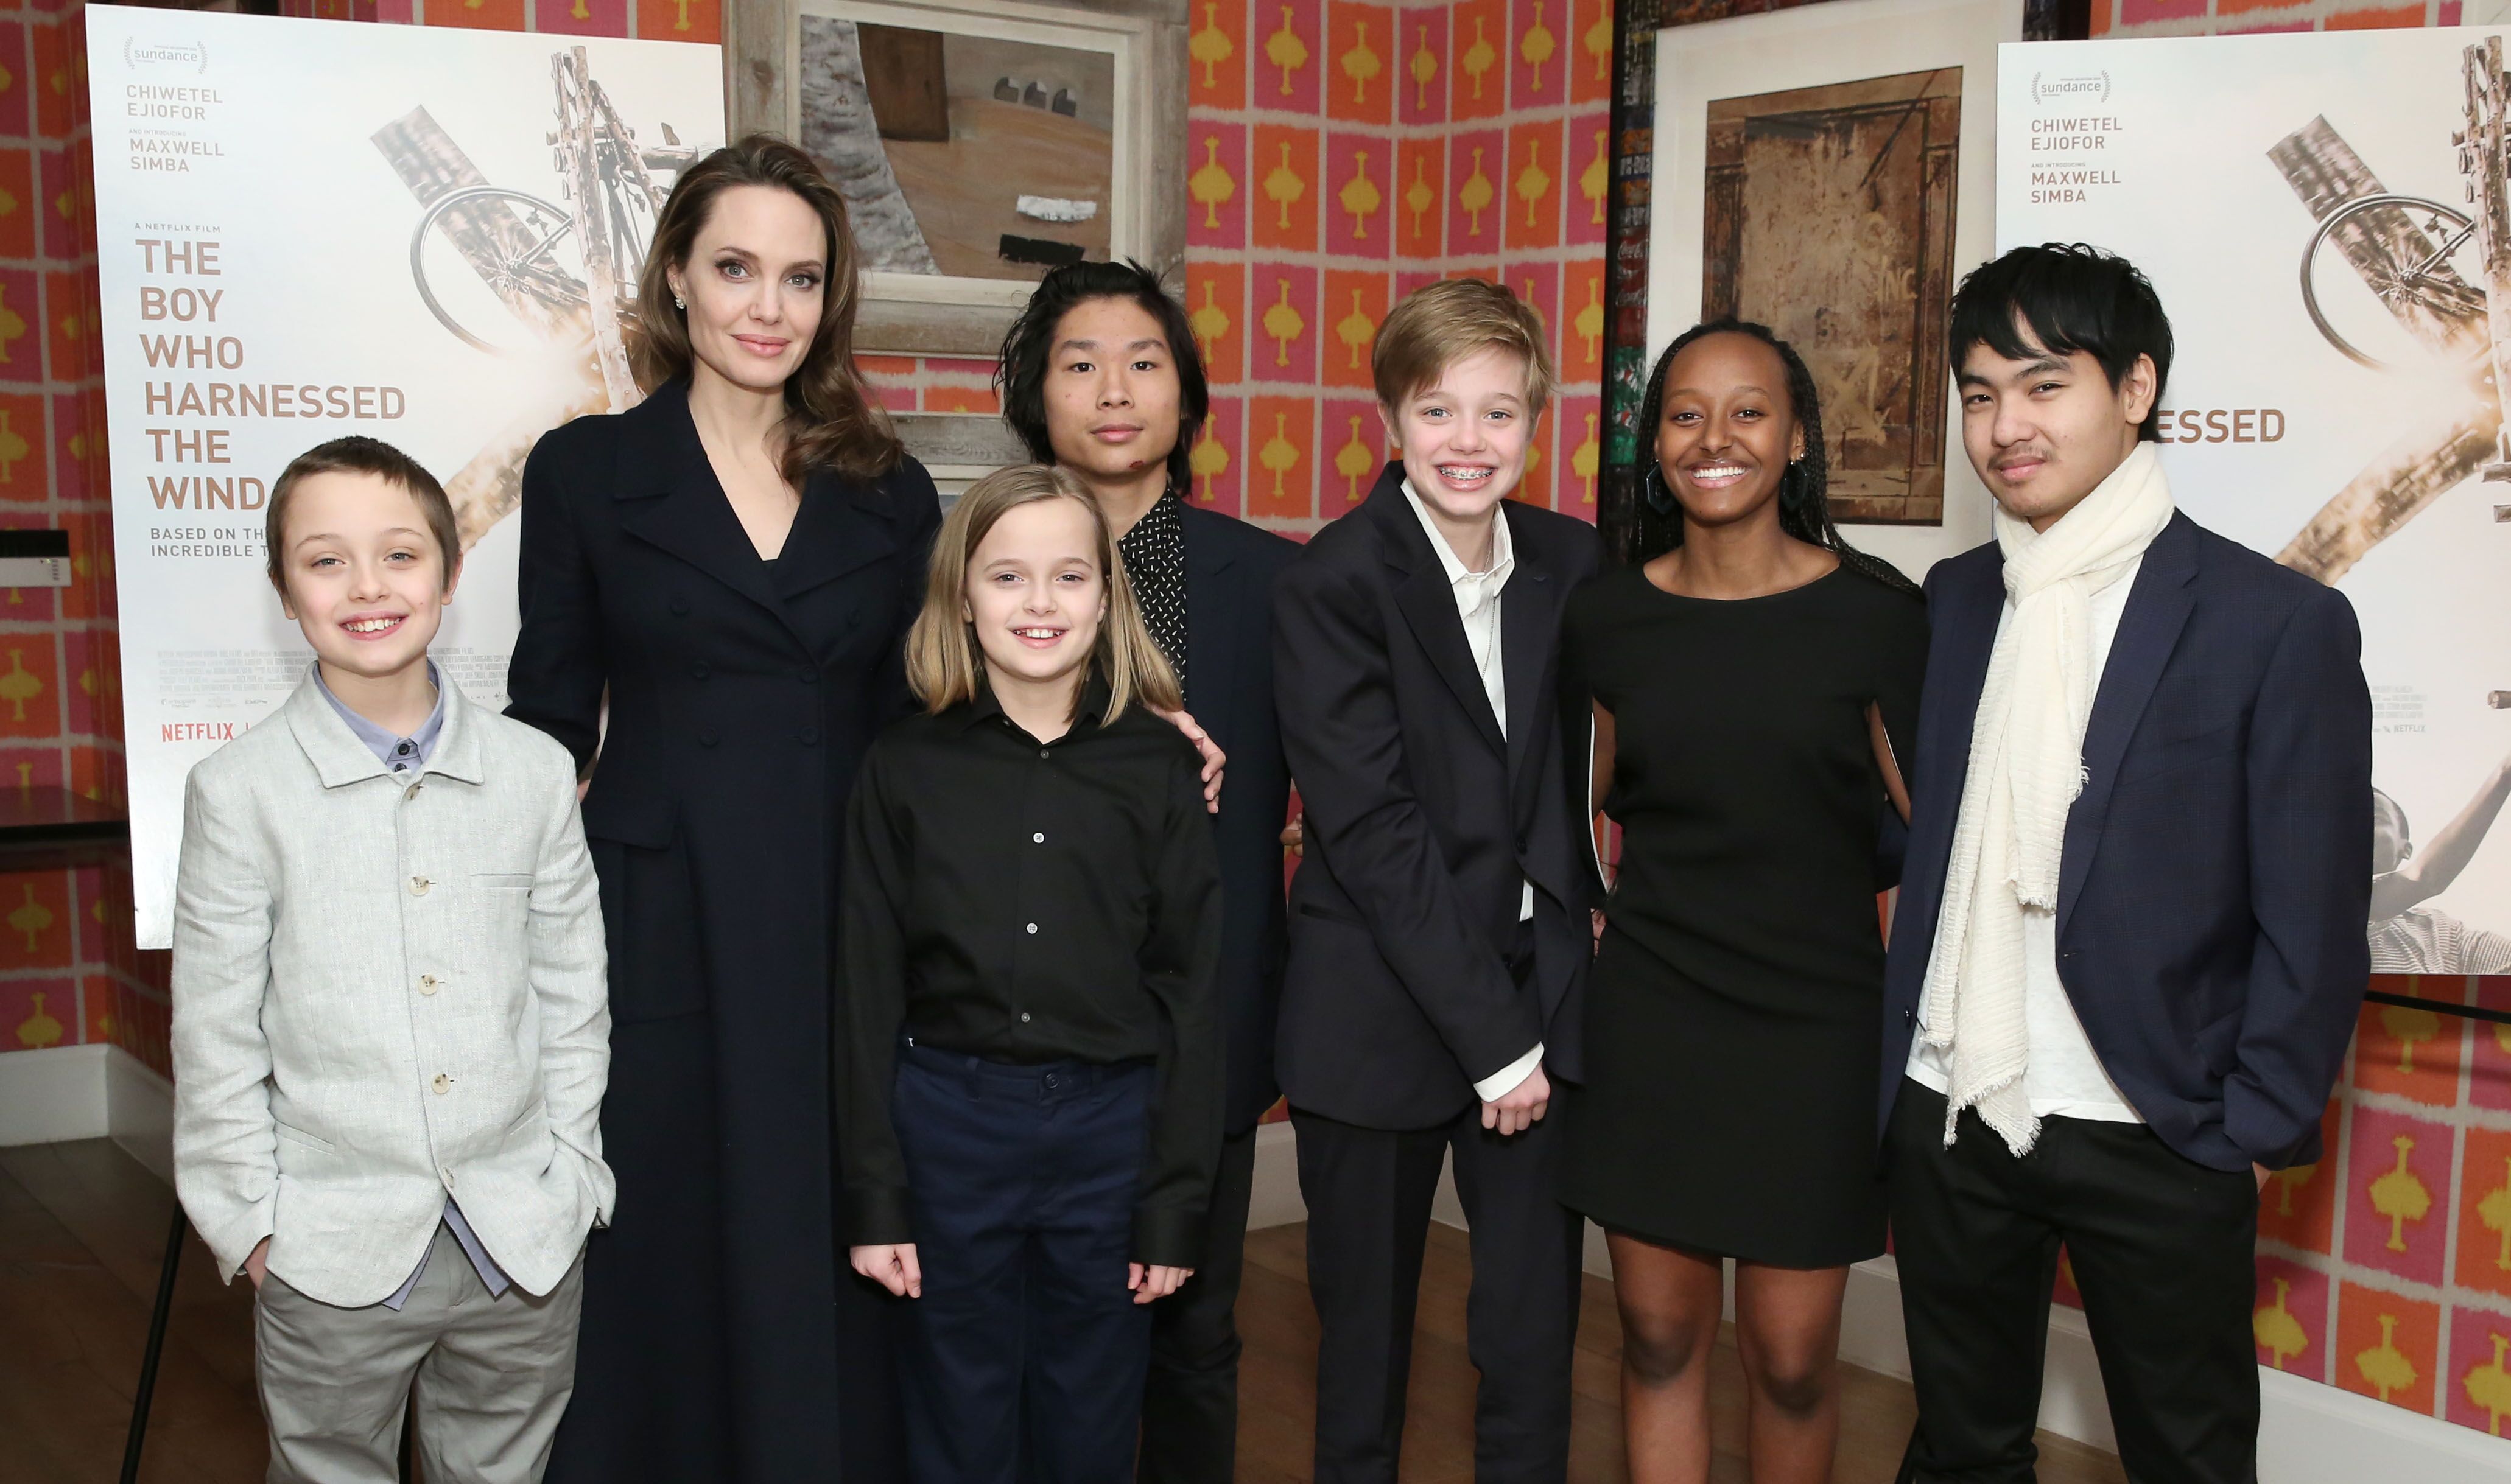 Angelina Jolie with children Knox, Vivienne, Pax, Shiloh, Zahara and Maddox Jolie-Pitt attend "The Boy Who Harnessed The Wind" screening in  2019 in New York | Source: Getty Images